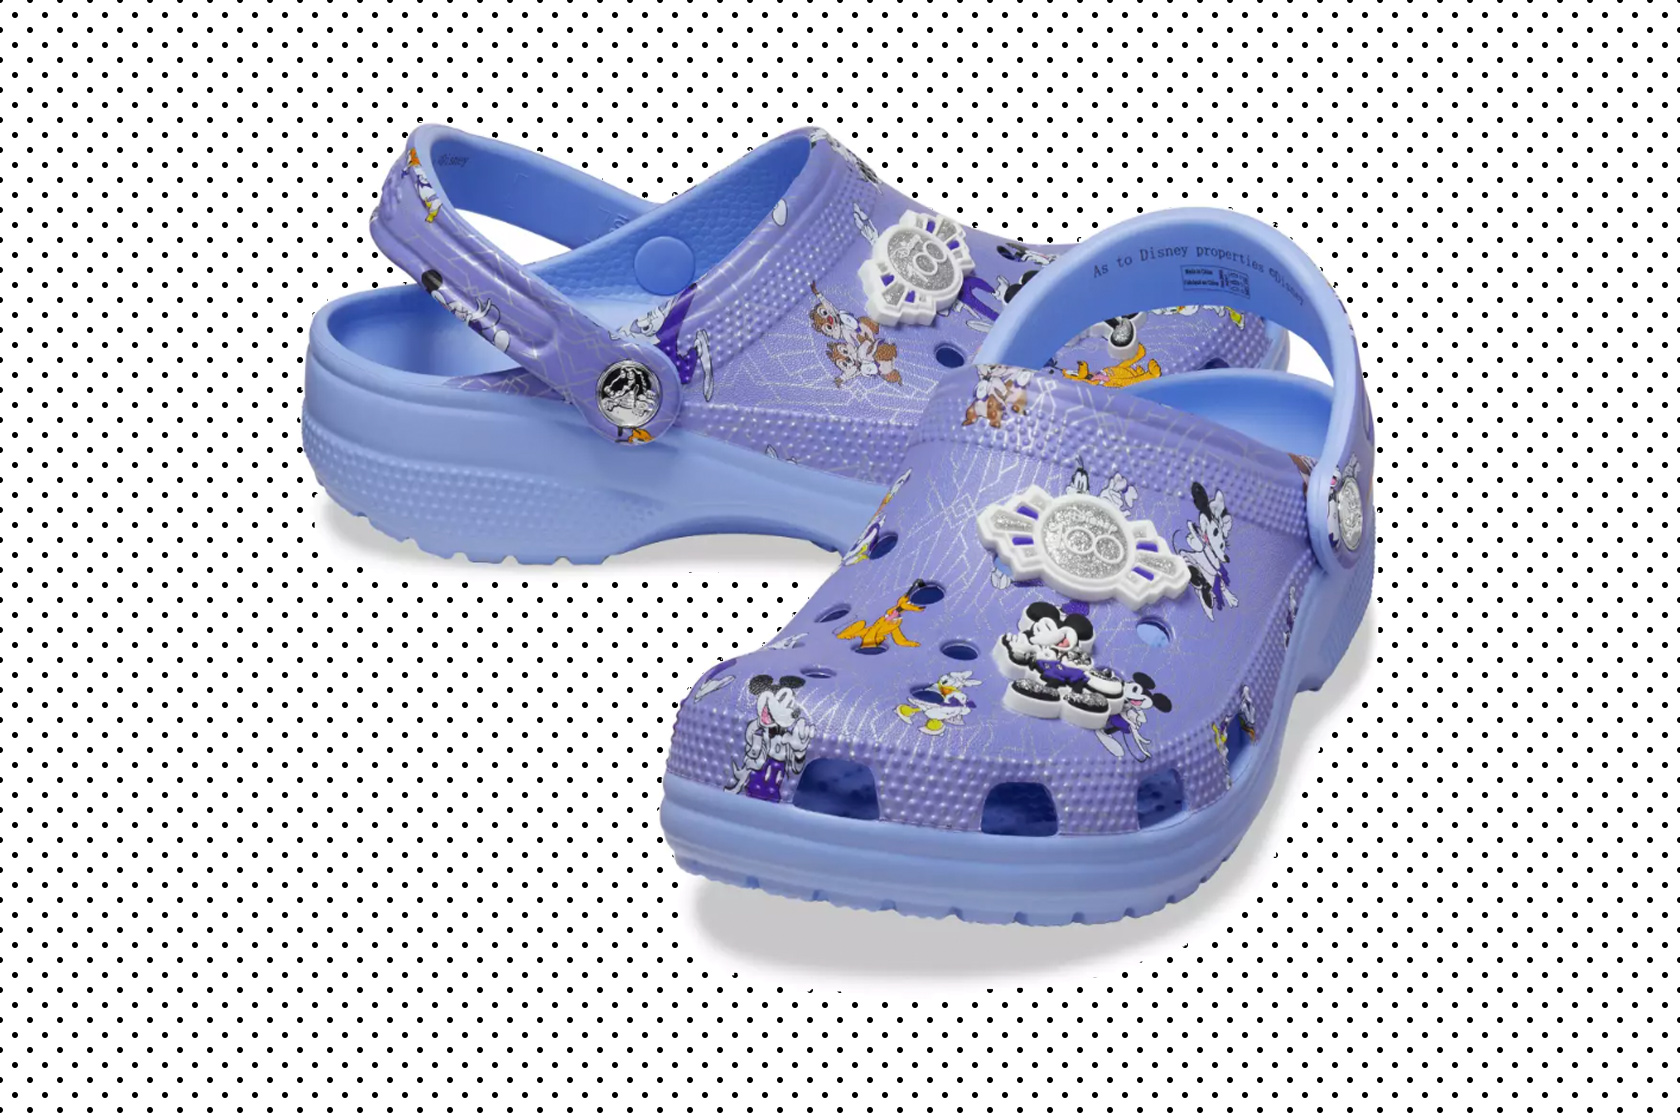 Get a new pair of Disney Crocs to celebrate the 100th anniversary